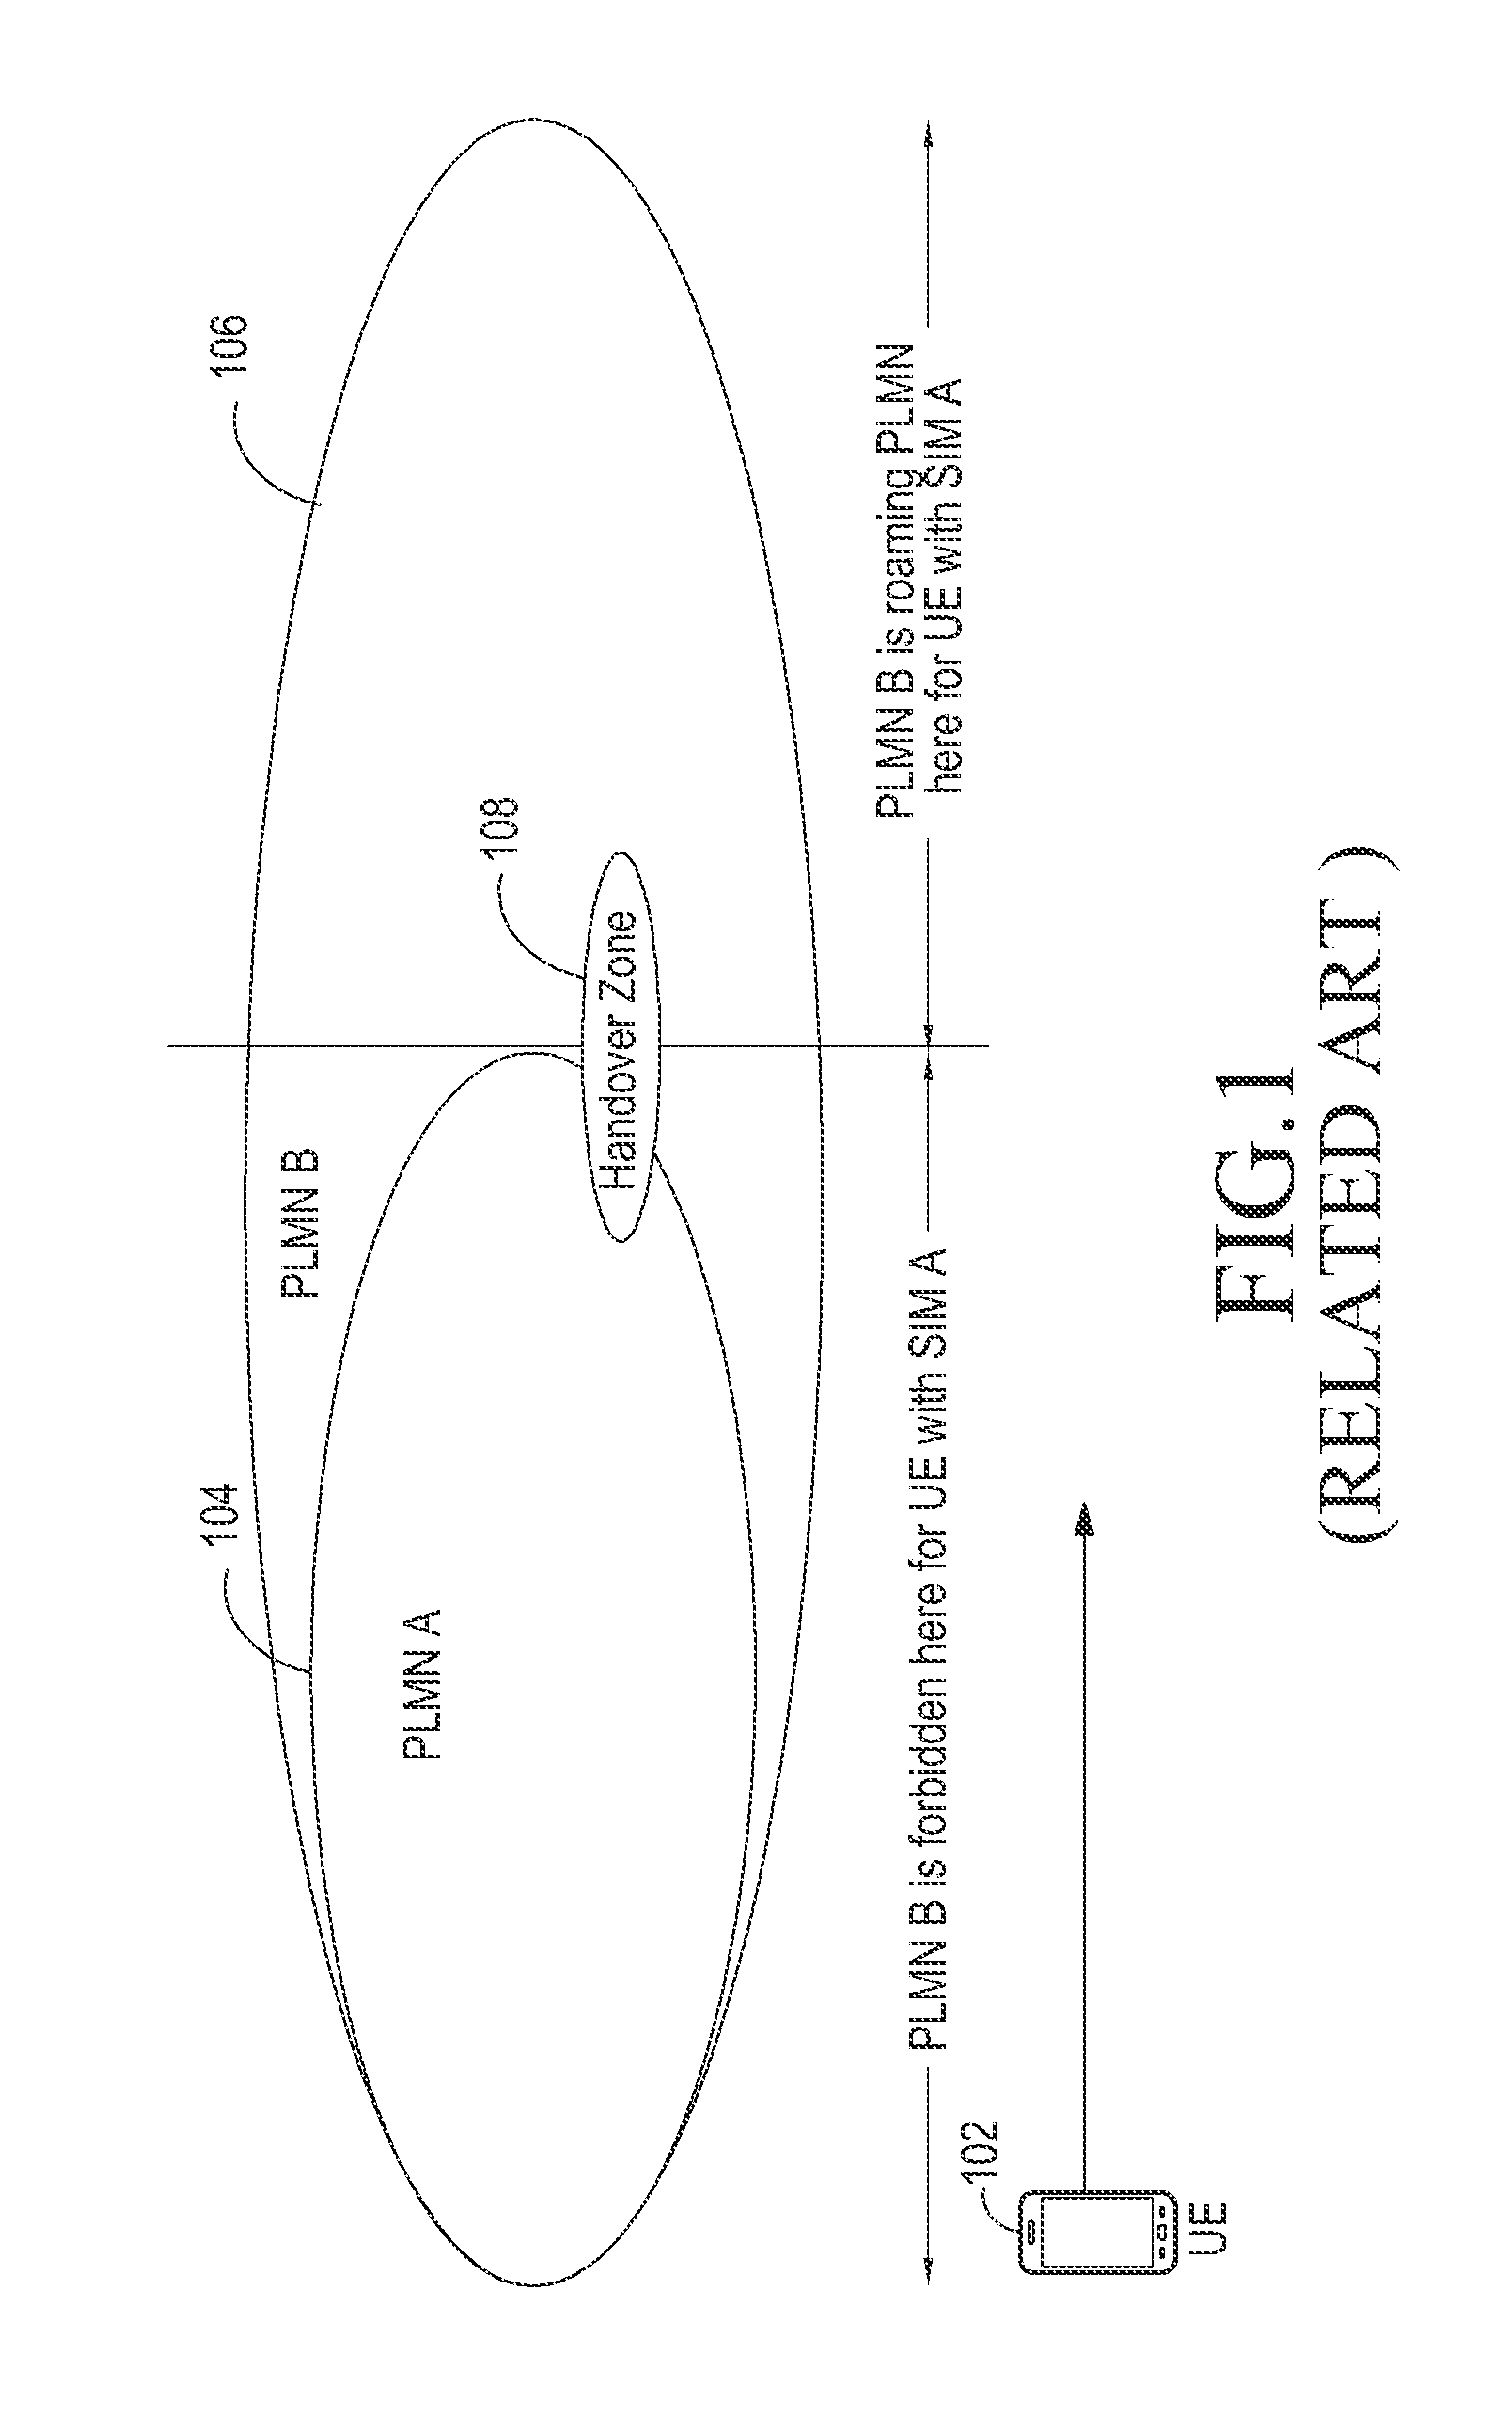 System and method for enabling quick recovery of services from a forbidden plmn